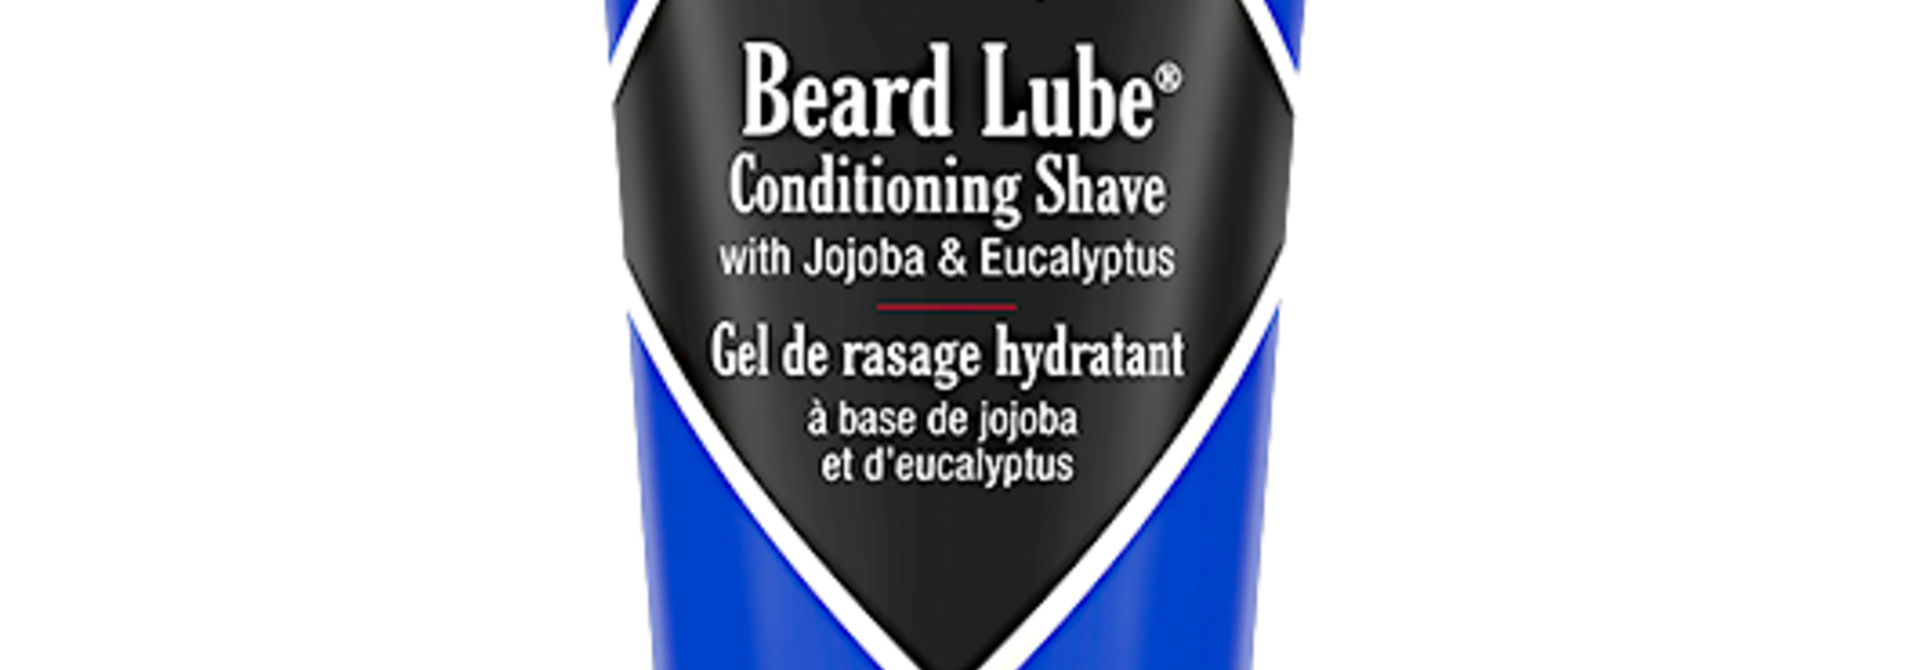 Beard Lube | The Daily Shave Collection